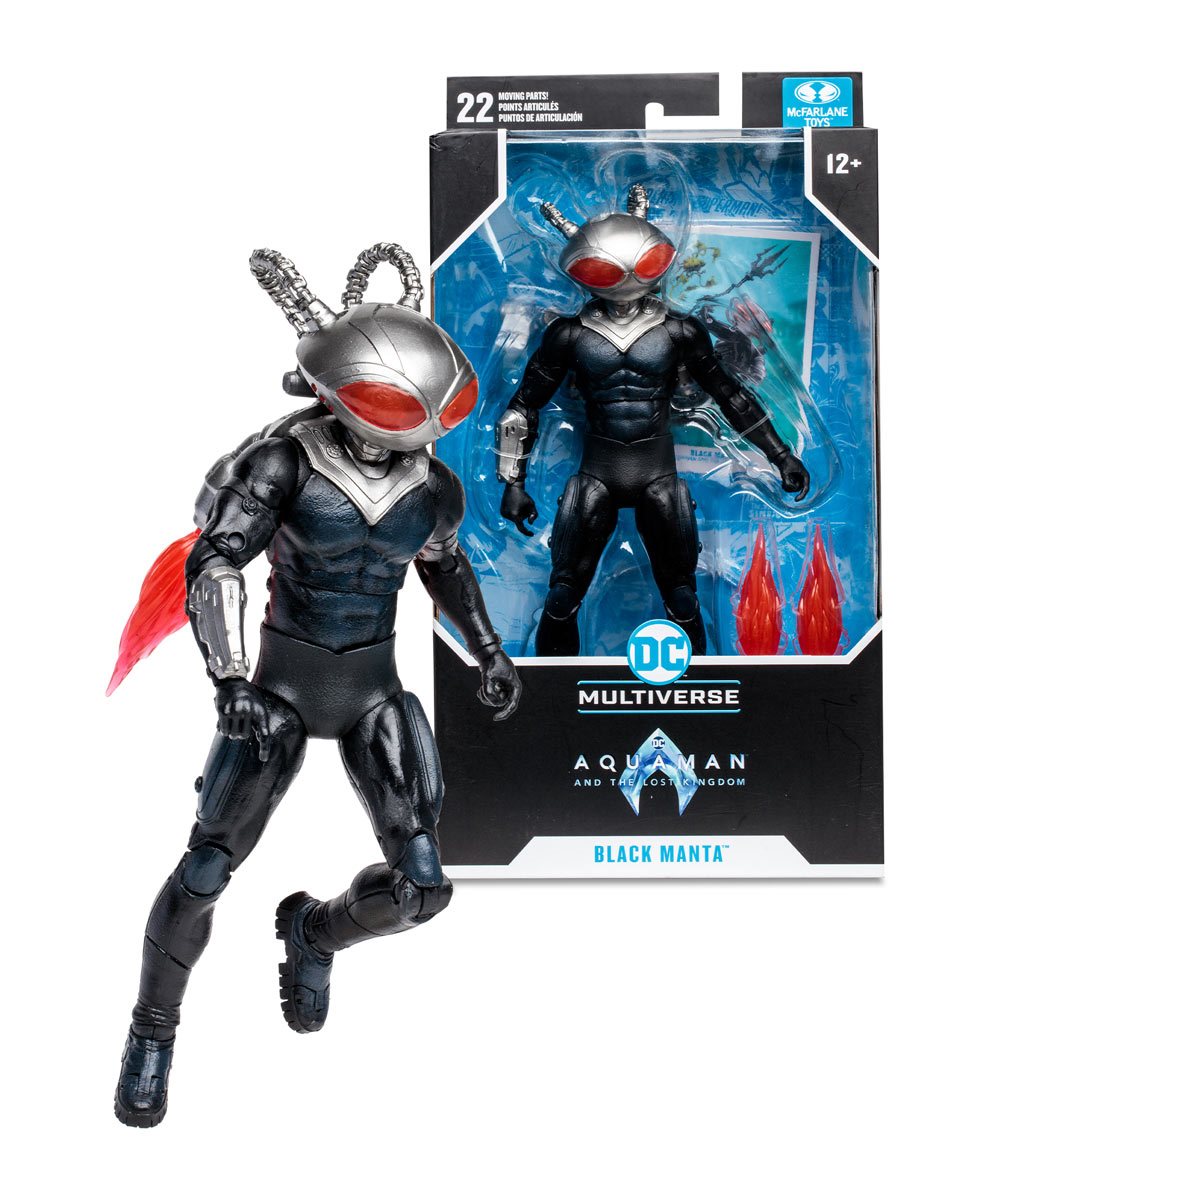 DC Multiverse - Aquaman and the Lost Kingdom Movie: Black Manta 7-Inch Scale Action Figure